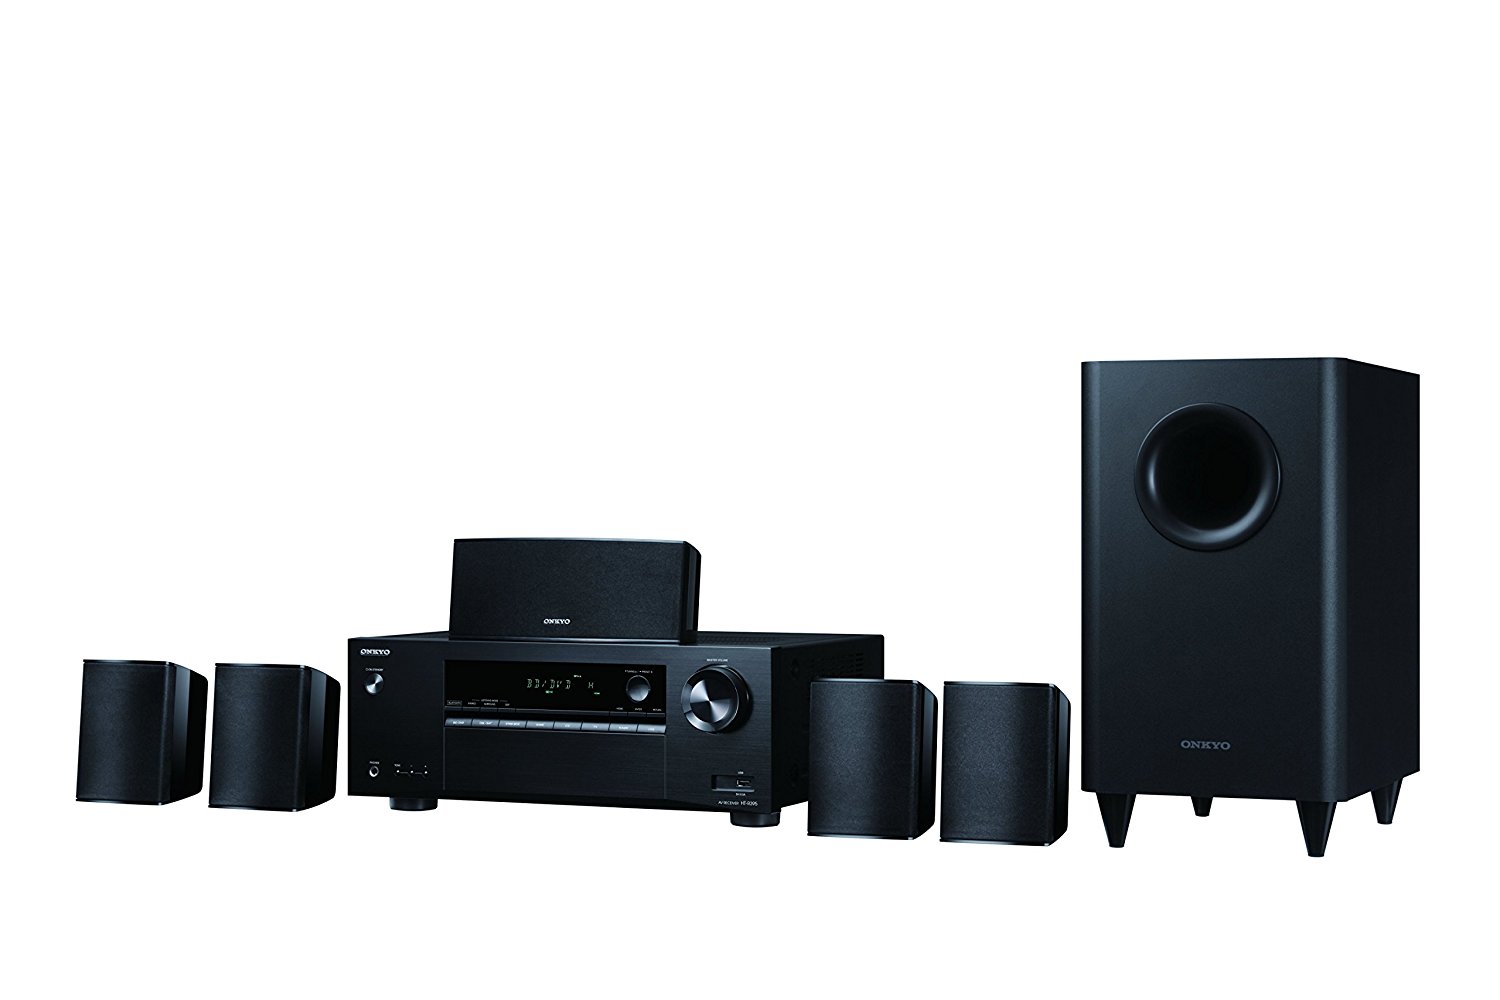 Today only: Onkyo 5.1 channel home theater package for $199